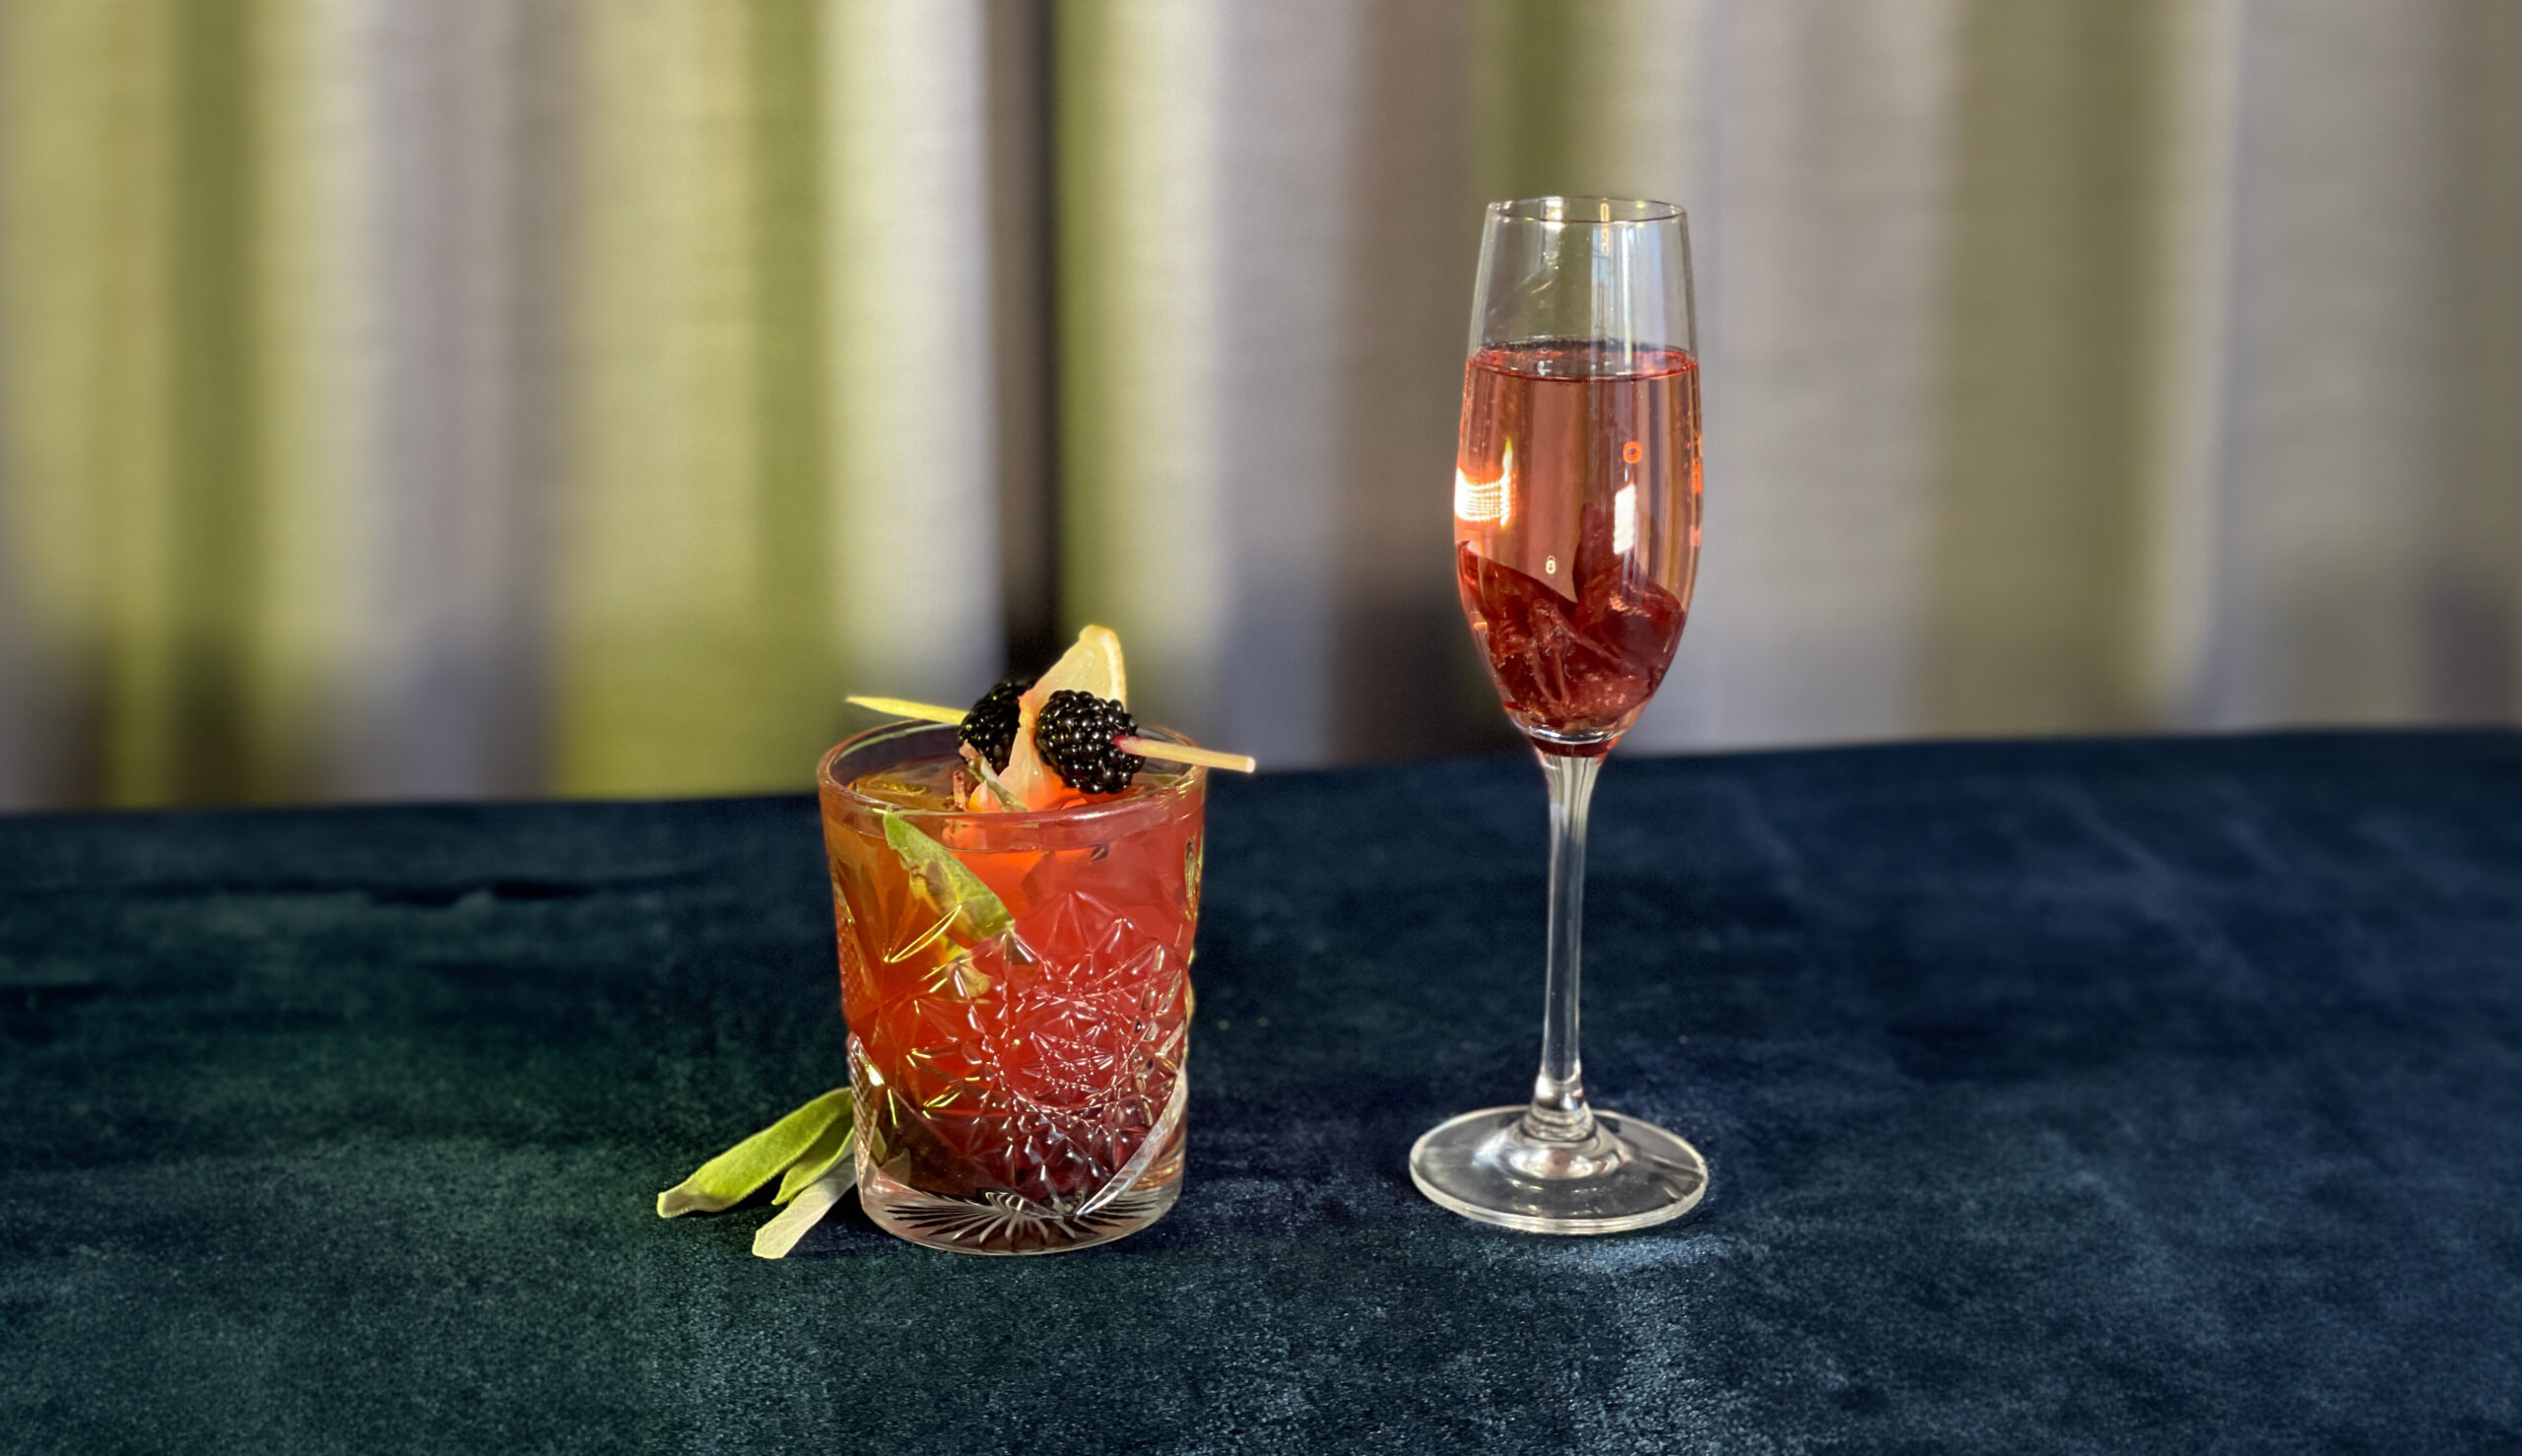 Two cocktails, side by side. One in a rocks glass garnished with a blackberry and lemon skewer, and one in a champagne flute, garnished with an edible hibiscus flower.